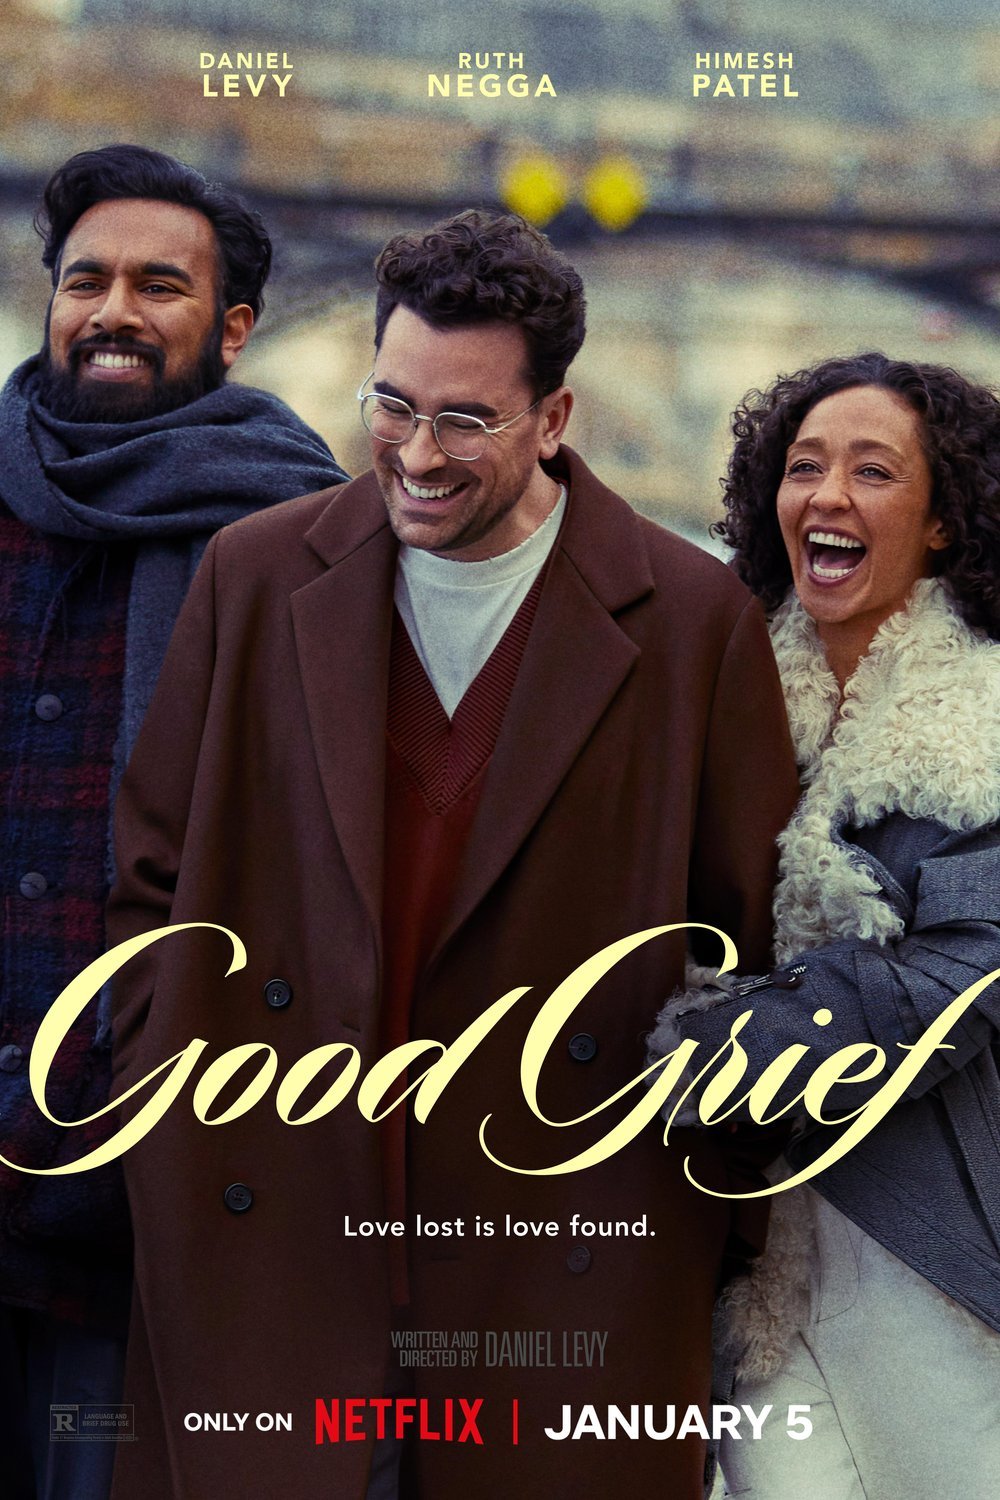 Poster of the movie Good Grief